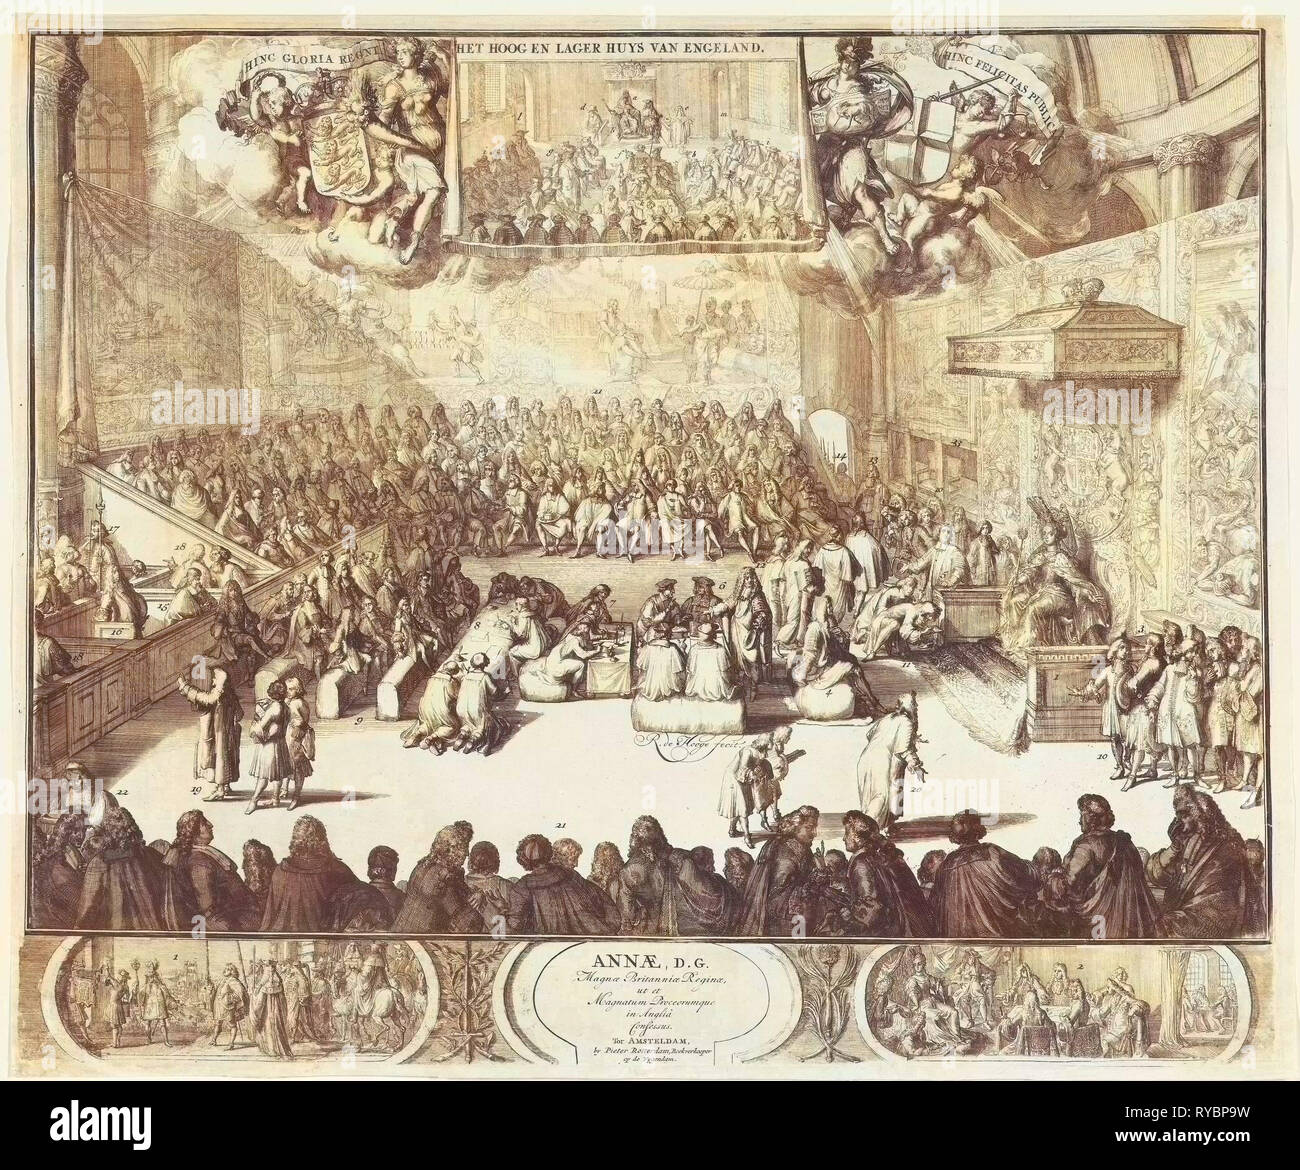 Session of the House of Commons with Queen Anne on the throne in 1702, Romeyn de Hooghe, 1702 Stock Photo